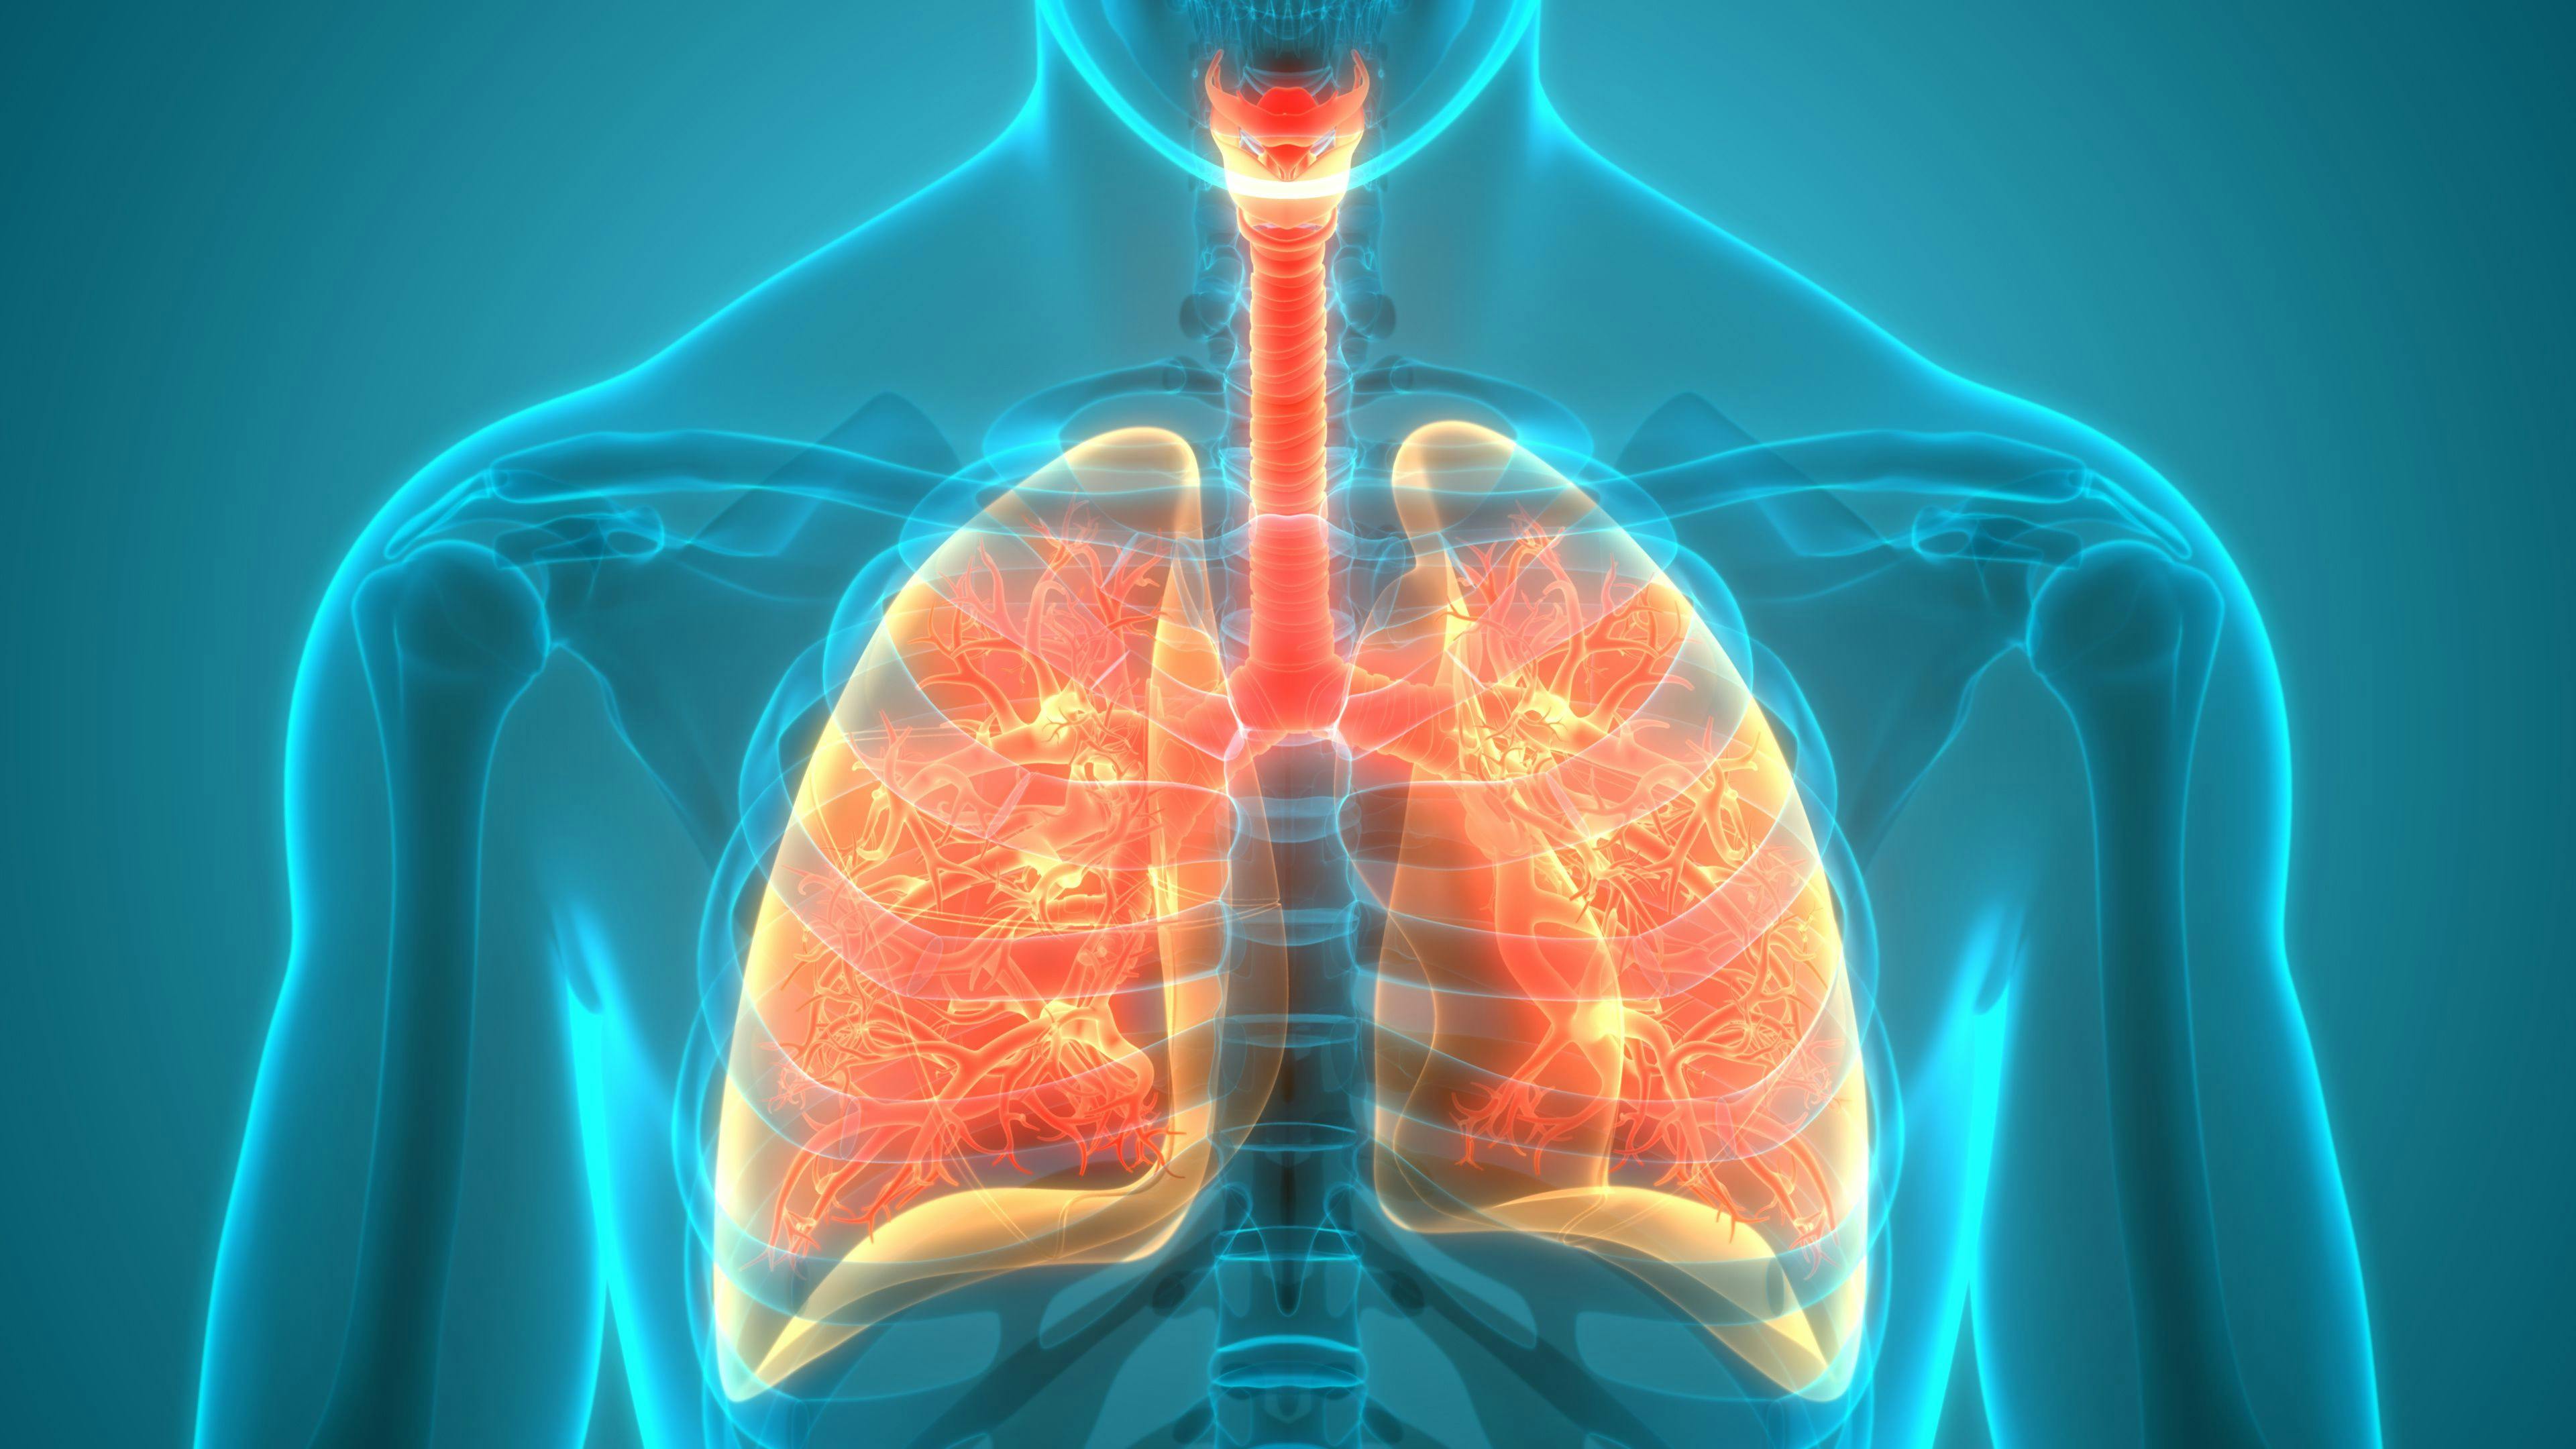 FDA Grants Priority Review to Tezepelumab for Asthma